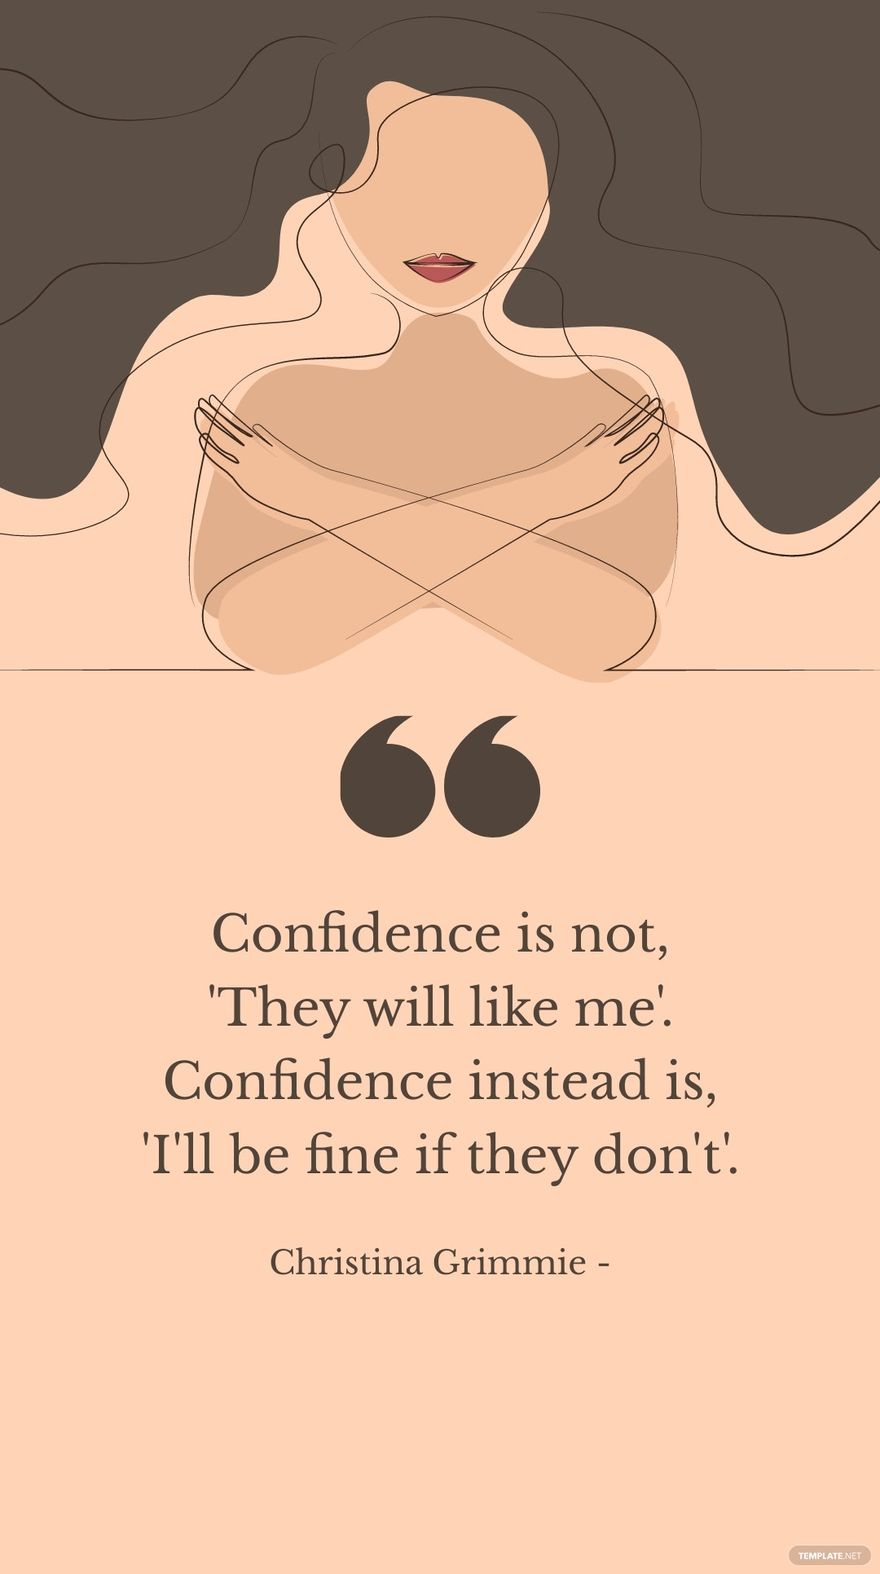 Christina Grimmie - Confidence is not, 'They will like me'. Confidence instead is, 'I'll be fine if they don't'. in JPG